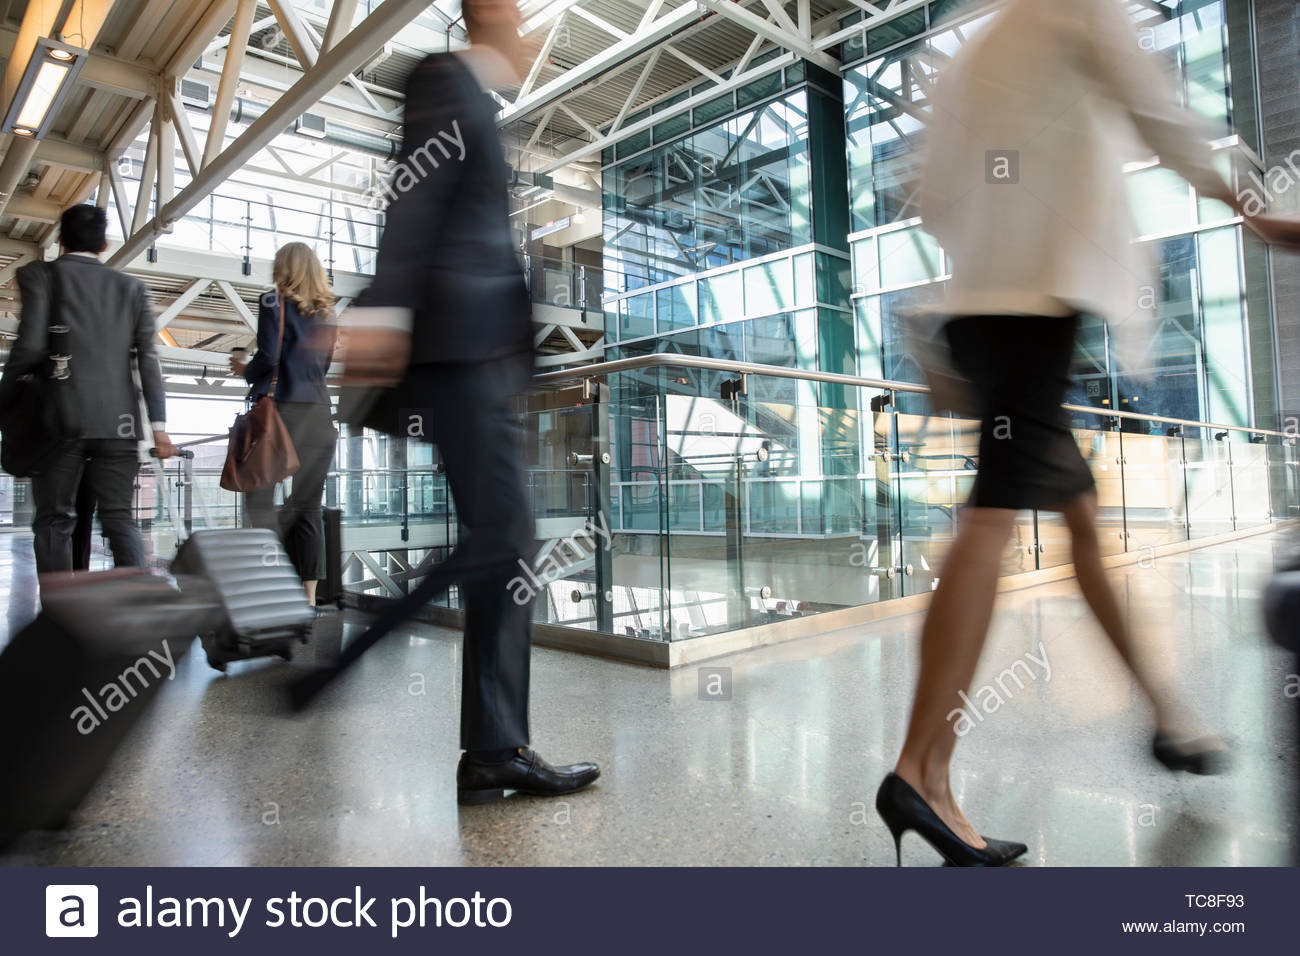 Business people with suitcases on the move in airport Stock Photo